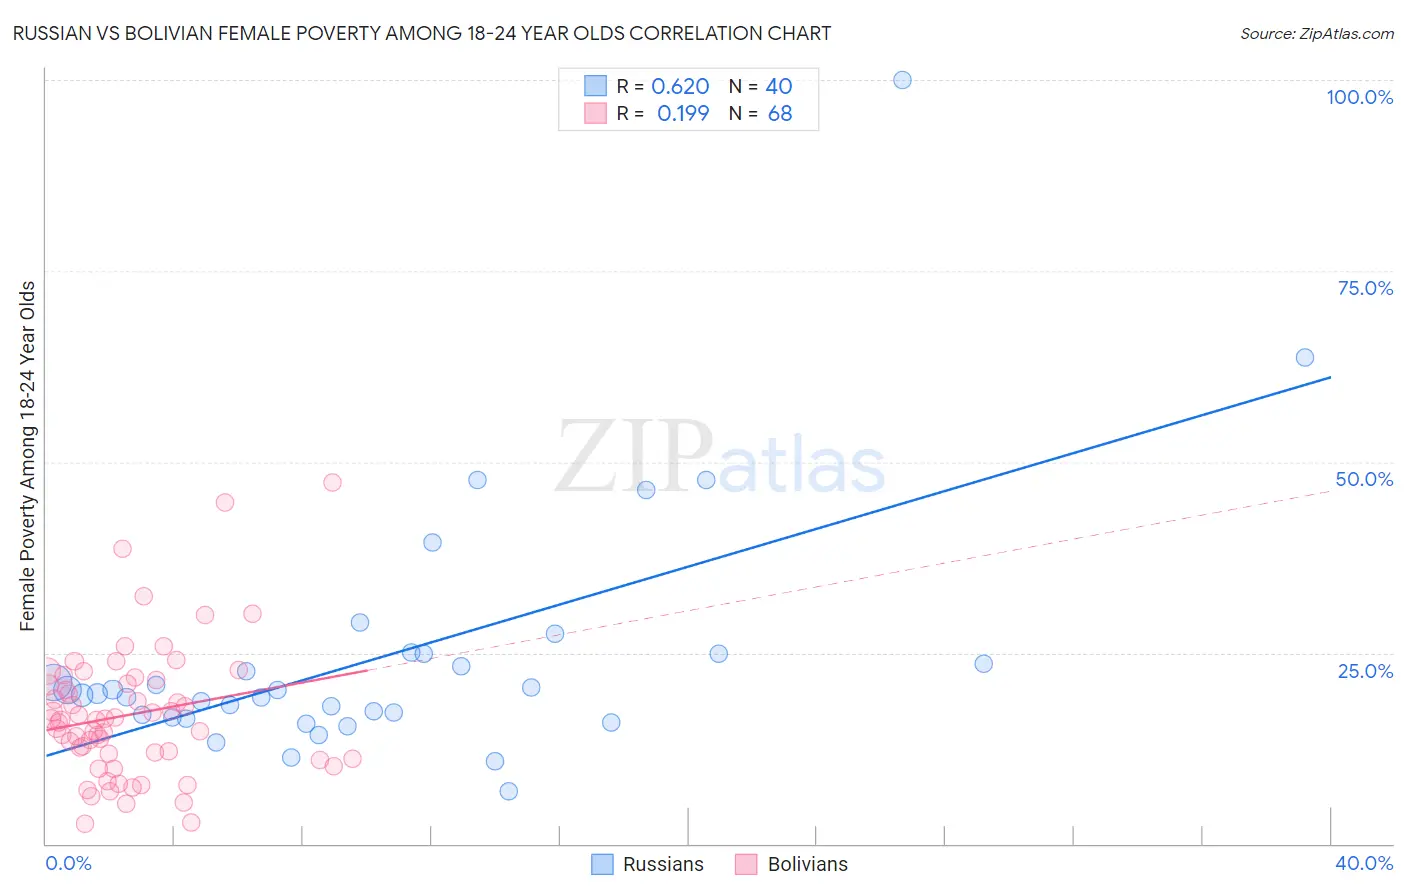 Russian vs Bolivian Female Poverty Among 18-24 Year Olds